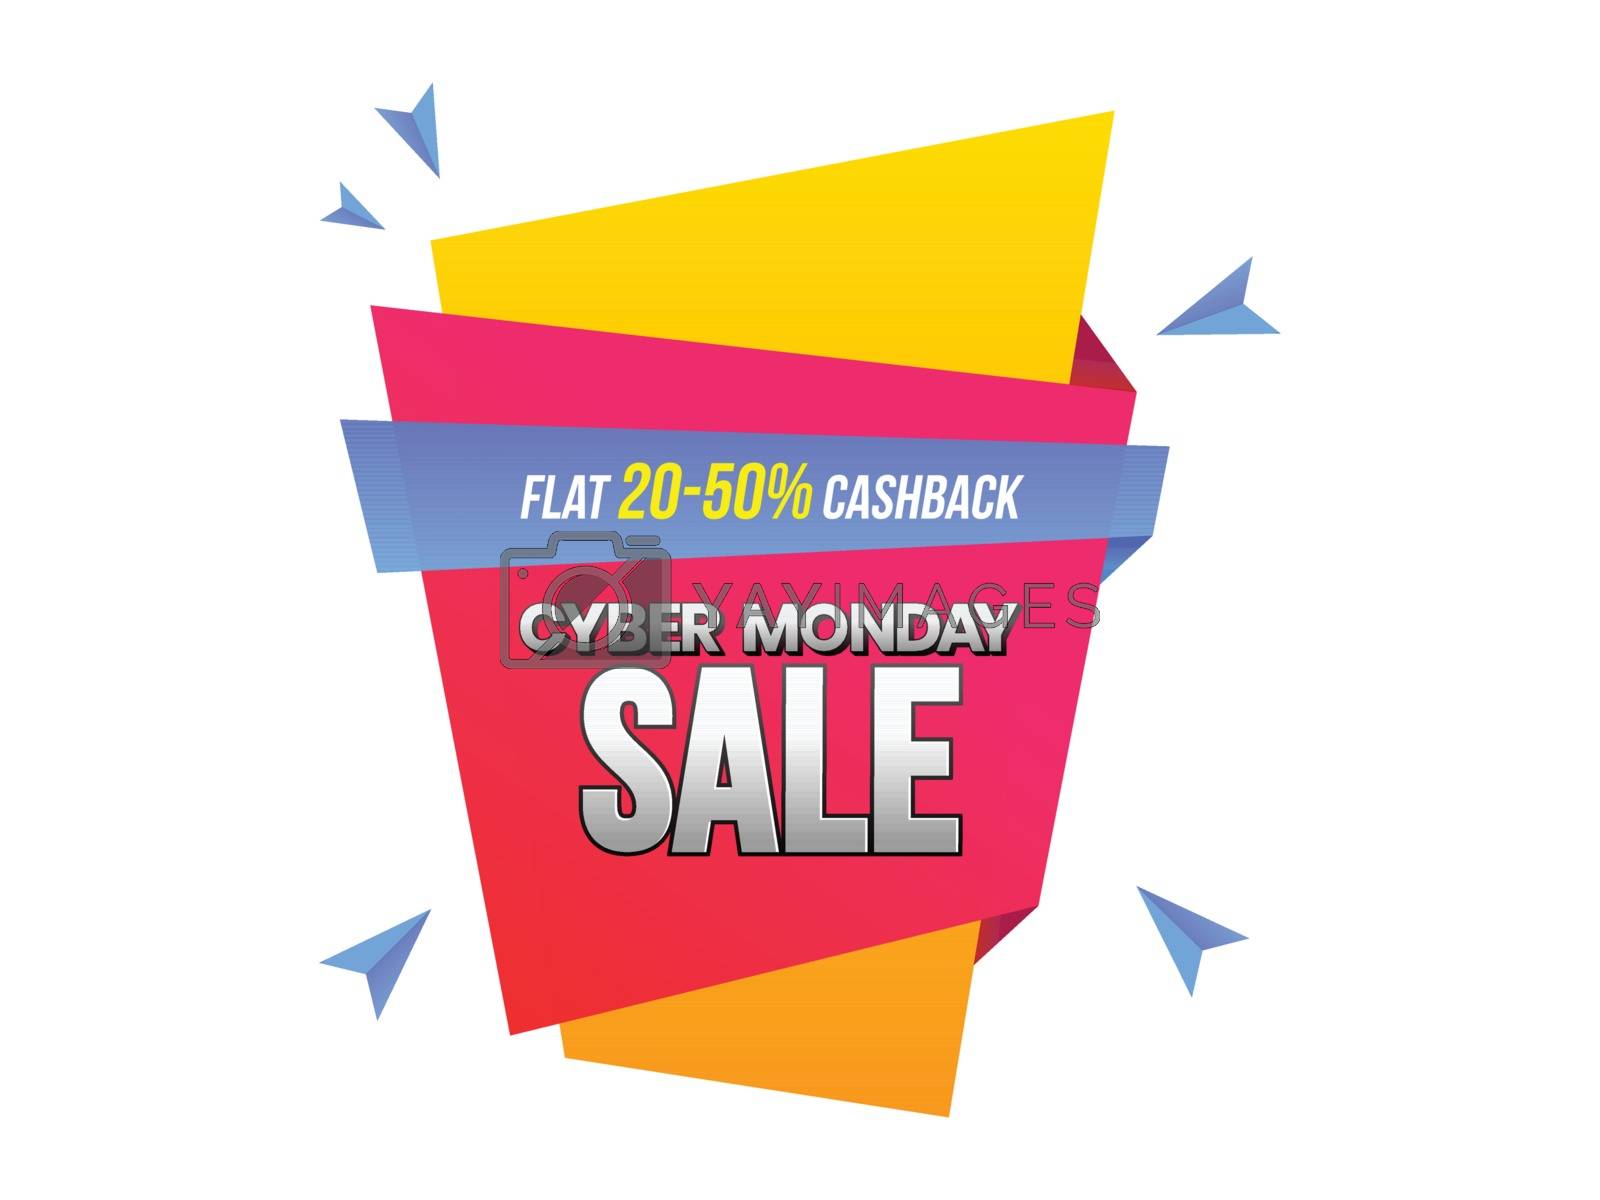 Royalty free image of Cyber Monday sale banner or label design with 20-50% discount of by aispl